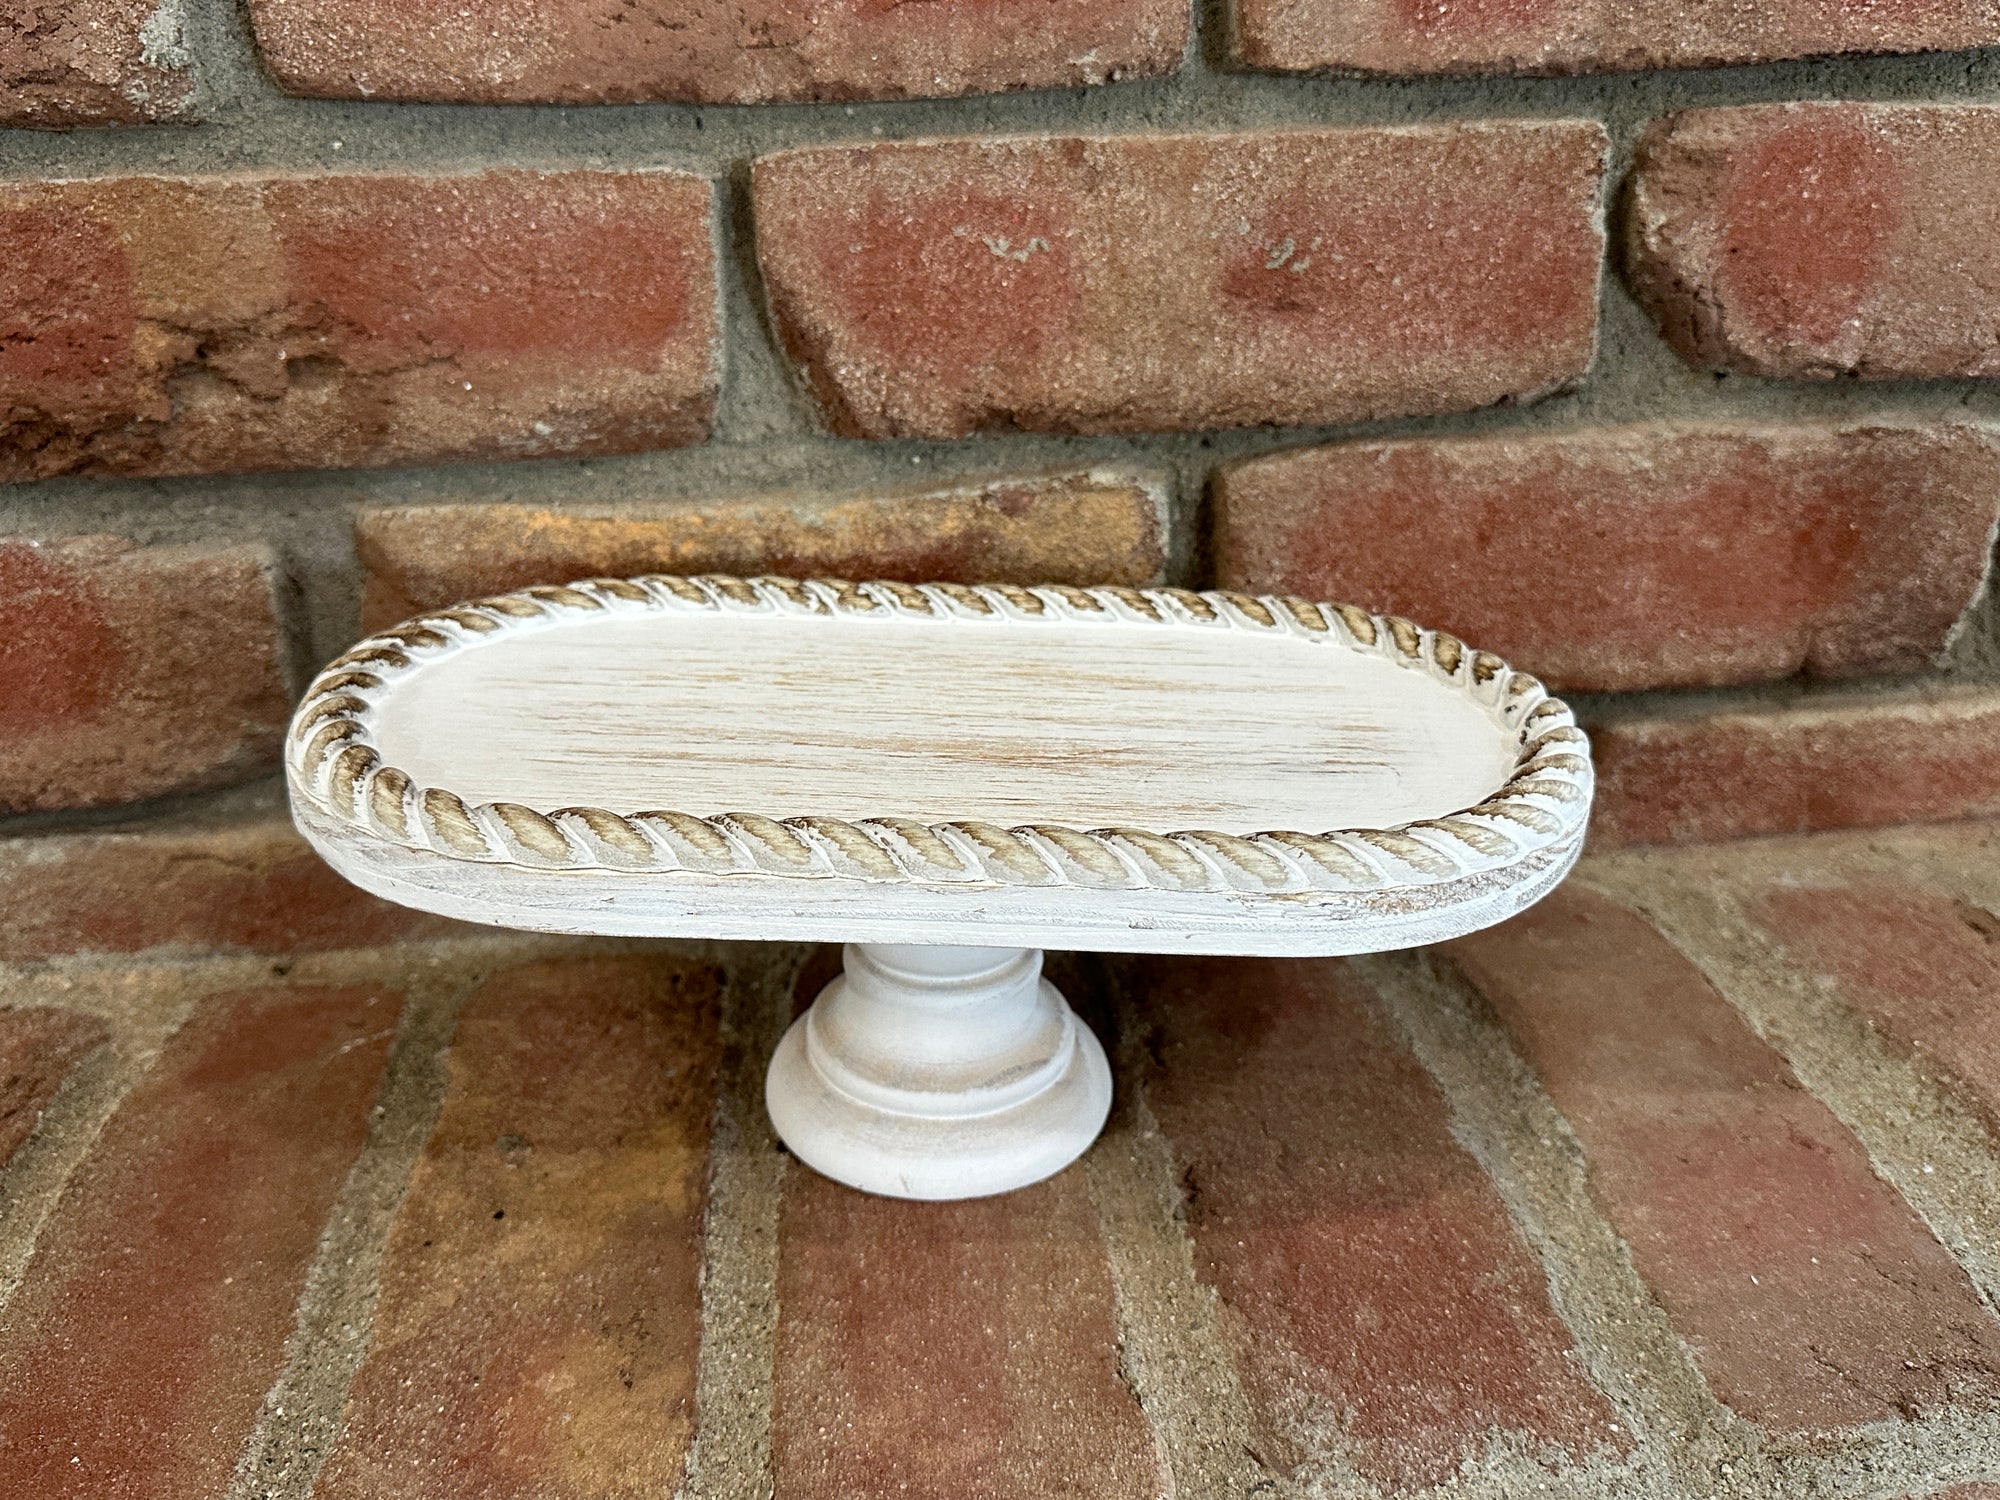 Winsome Pedestal 10.25” - Two Styles